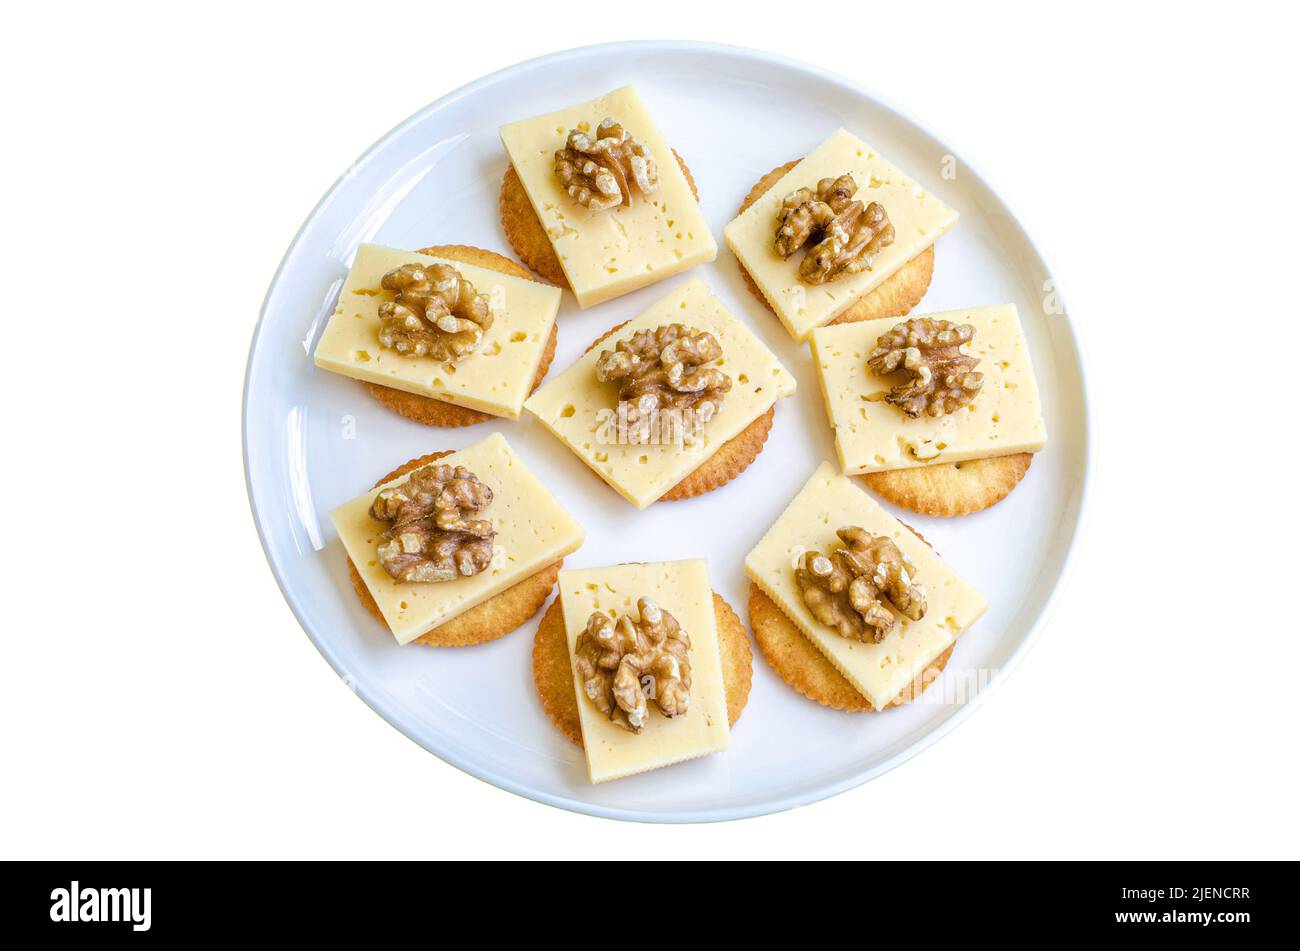 Round Buttery Cracker with Creamy Cheddar Cheese with Nuts On Plate Isolate Stock Photo